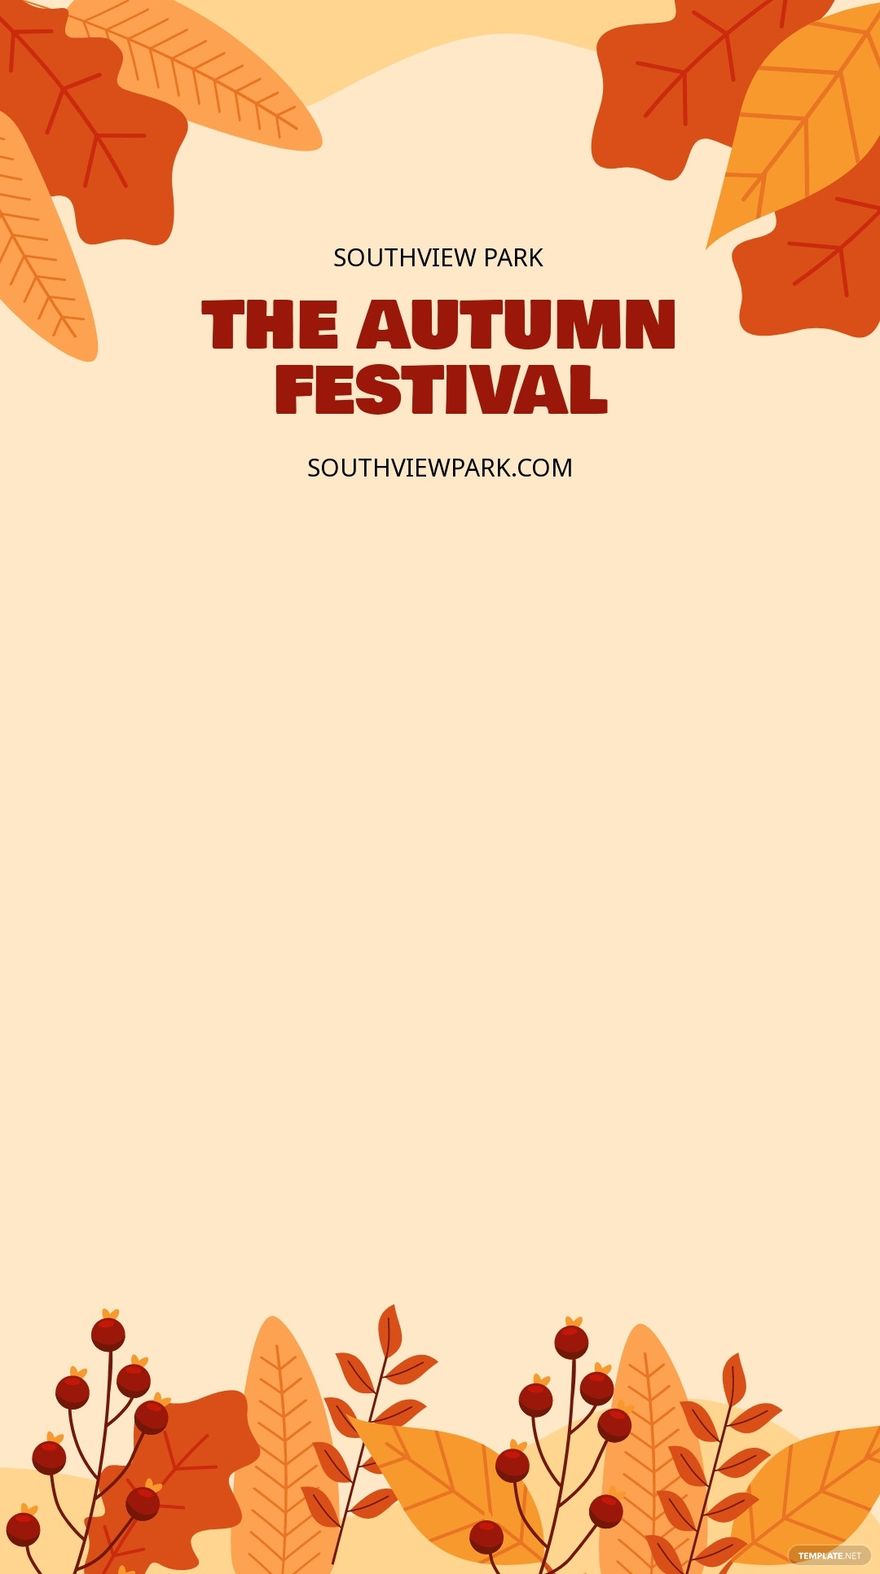 Free Fall/Autumn Festival Snapchat Geofilter Template